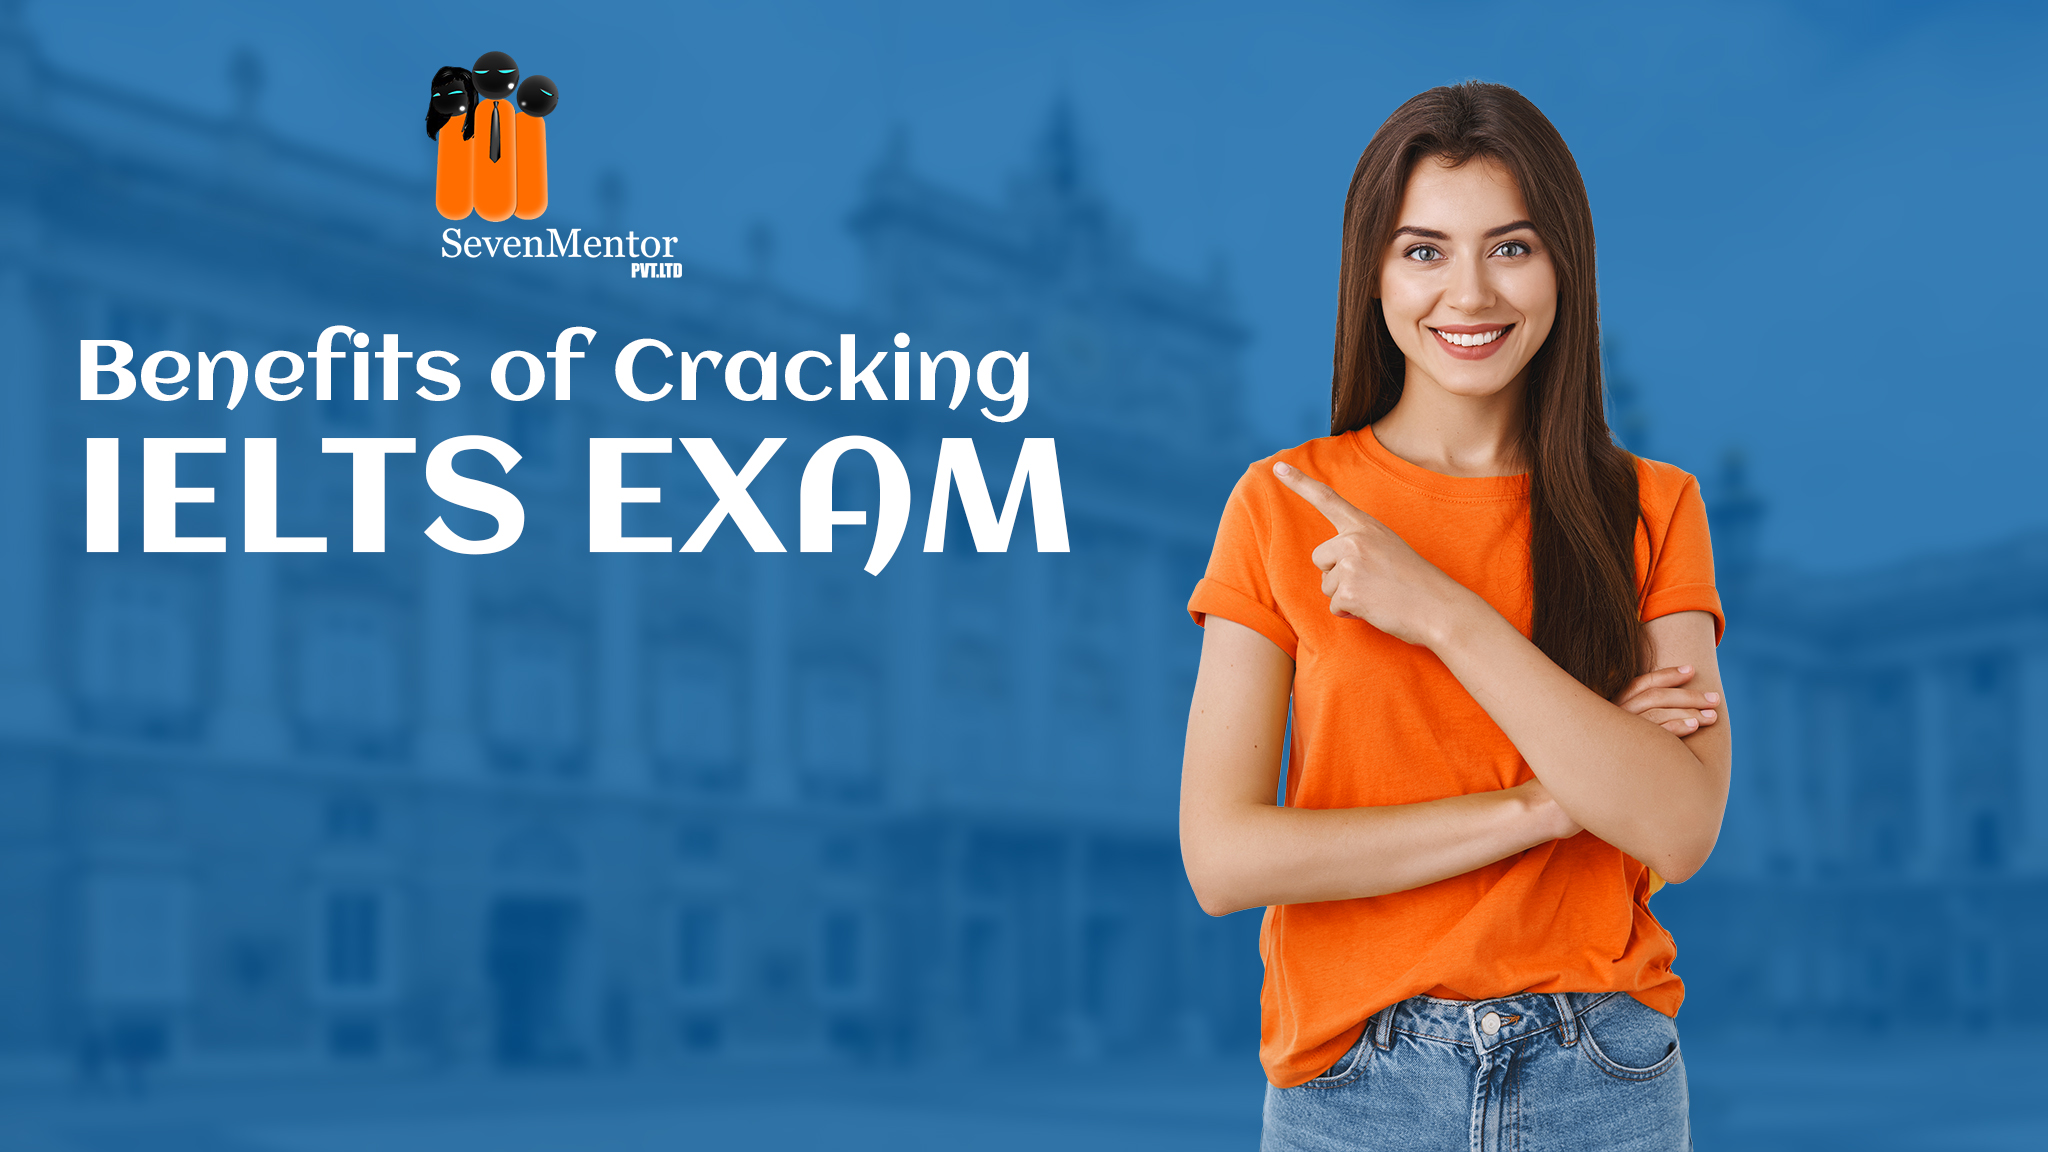 Benefits of cracking the IELTS Exam